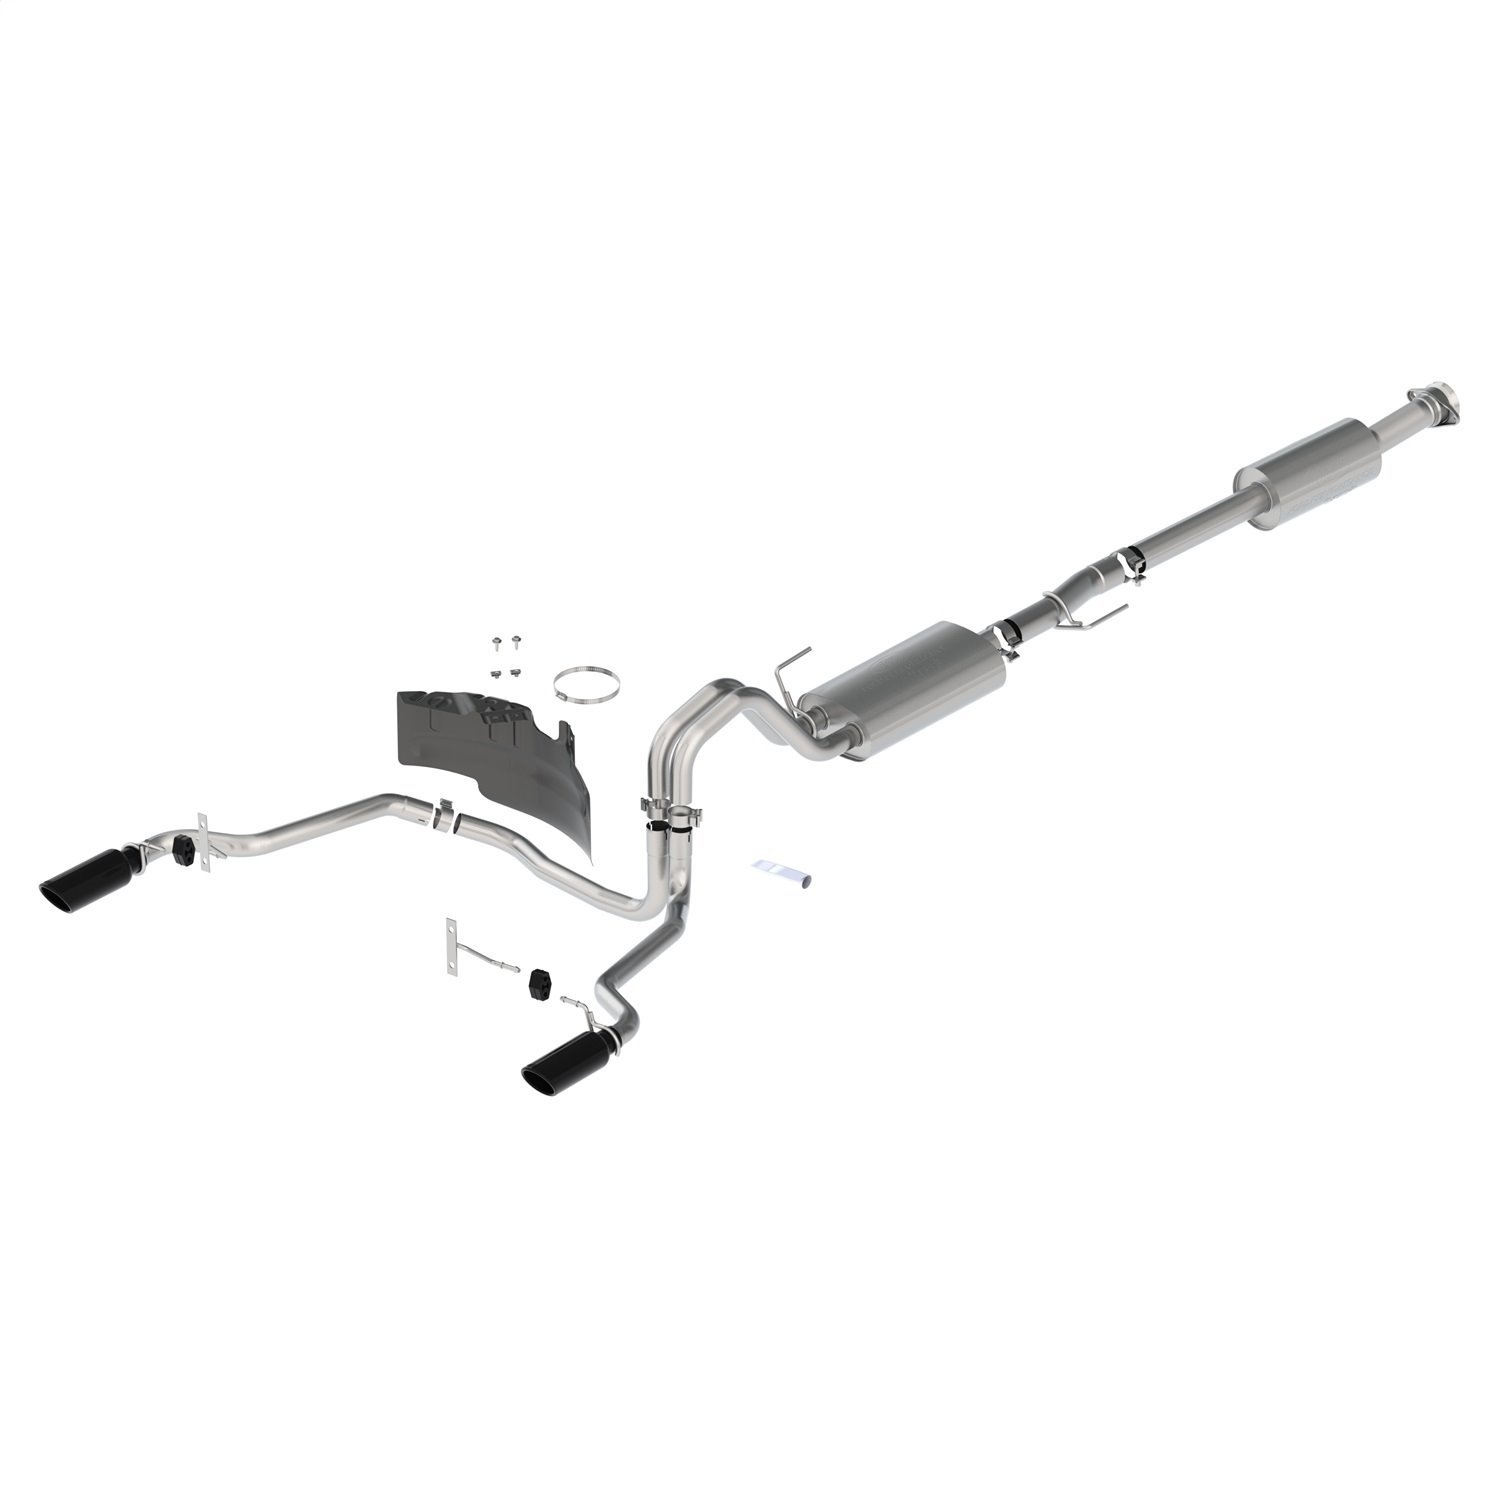 Cat-Back Touring Exhaust System Fits Select Ford F-150 2.7L, 3.5L, 5.0L Trucks w/145, 157 in. WB [Black Chrome Tips]